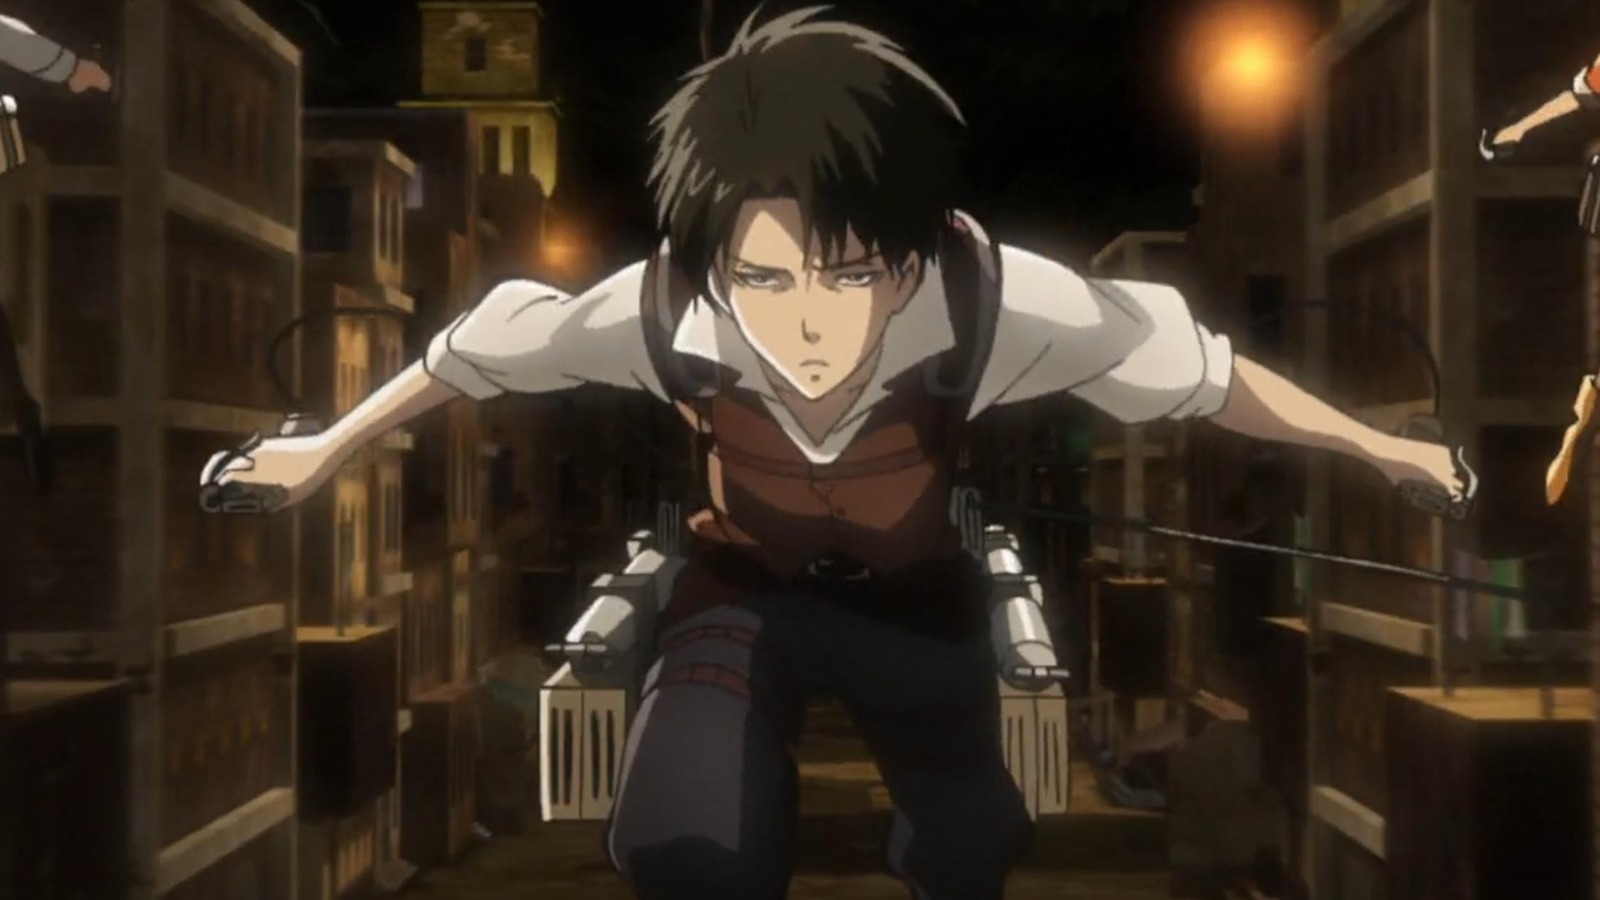 We Get Attack On Titan Spin-Off Centered On Levi?